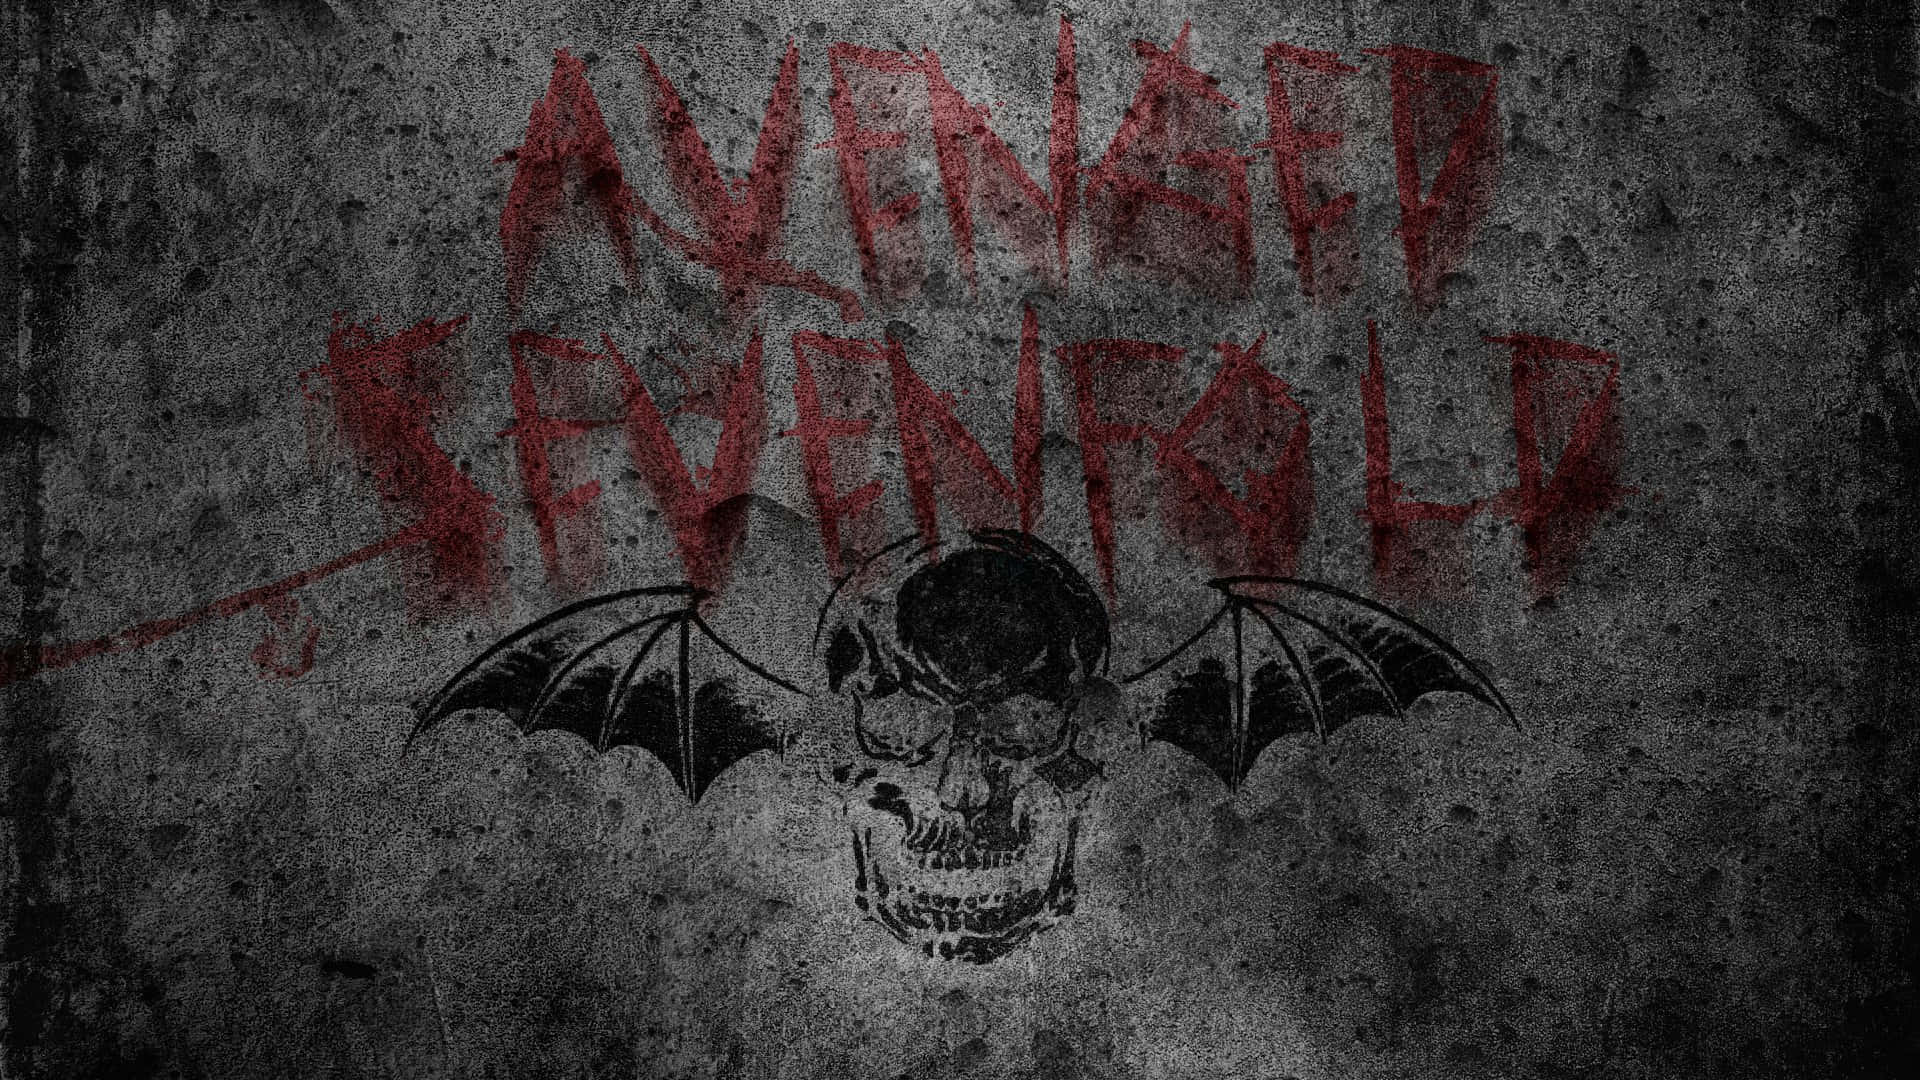 Step up your mobile gaming experience with the Avenged Sevenfold Iphone Wallpaper